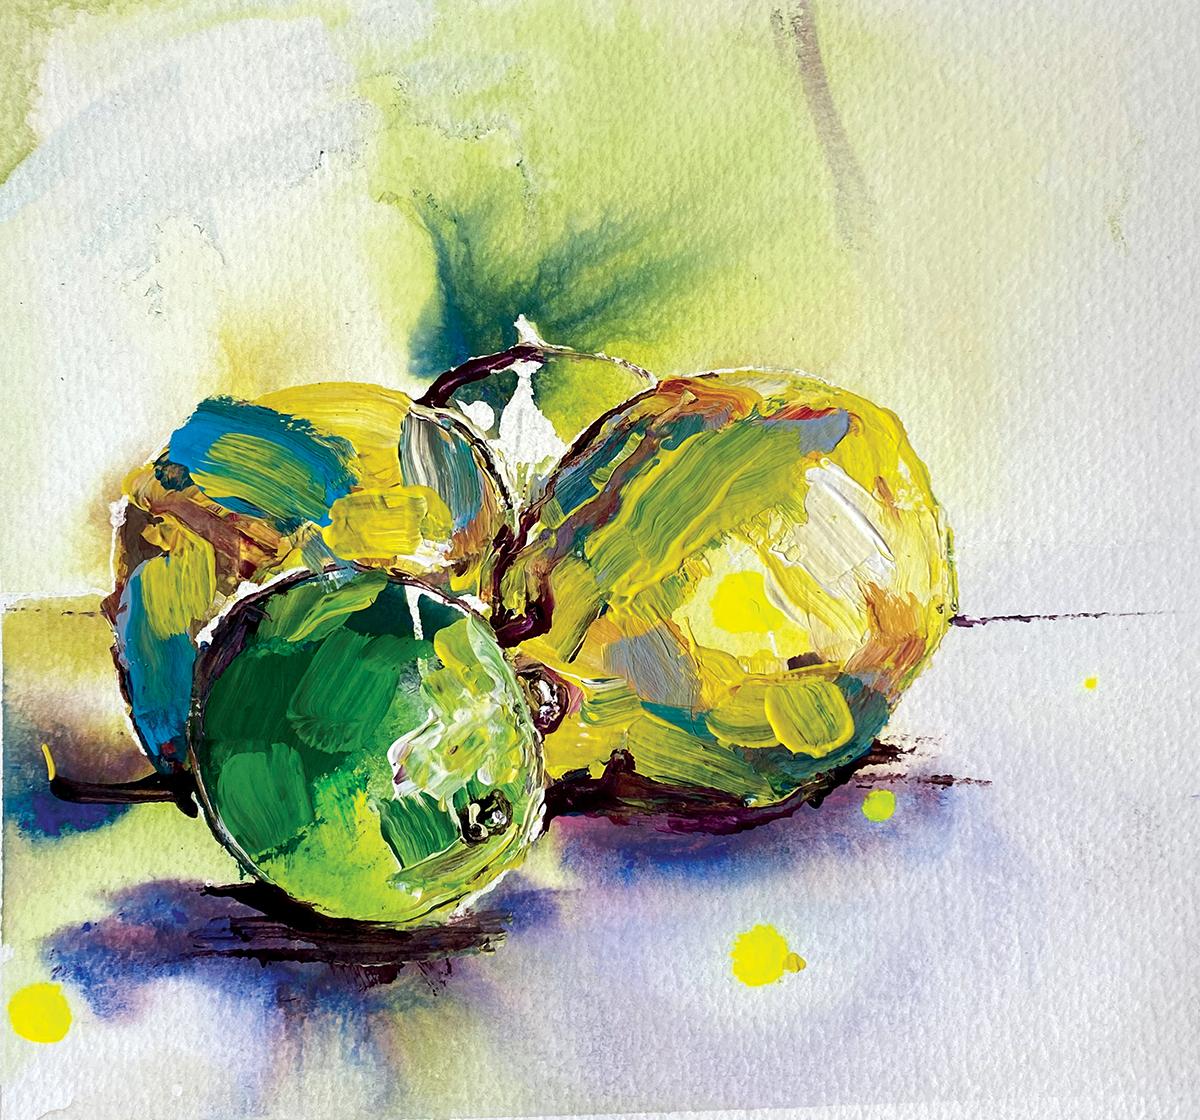 Fruit series #4 by Rachael Dalzell. Acrylic on paper. 